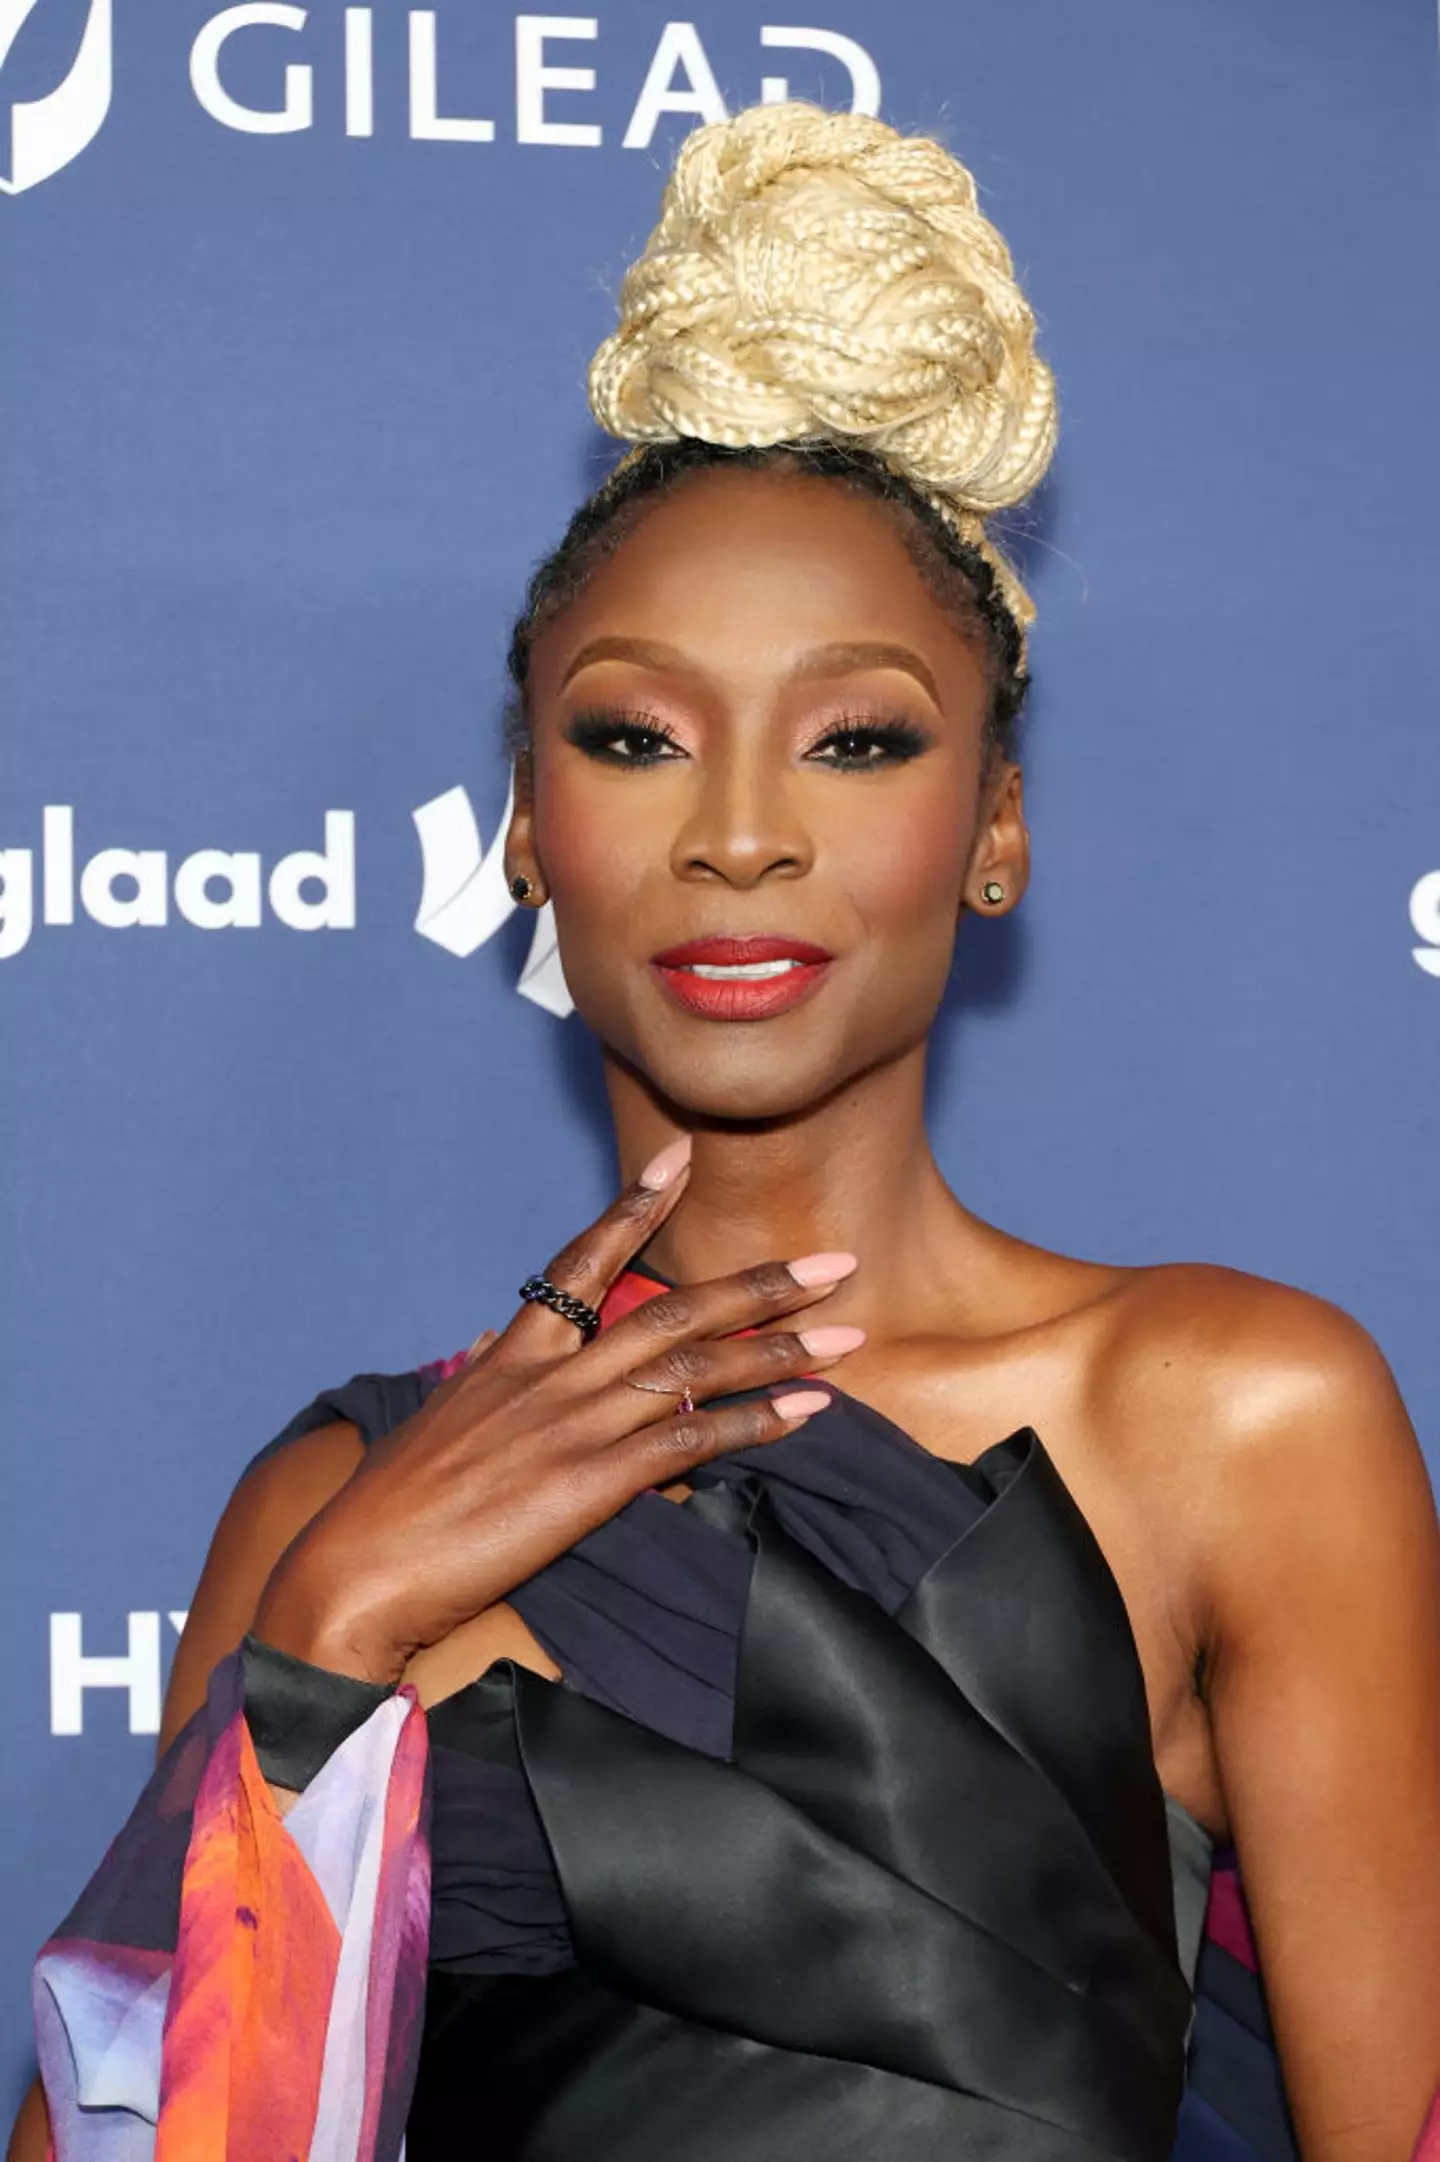 Angelica Ross has opened up on Emma Roberts' apology phone call for her transphobic comment.